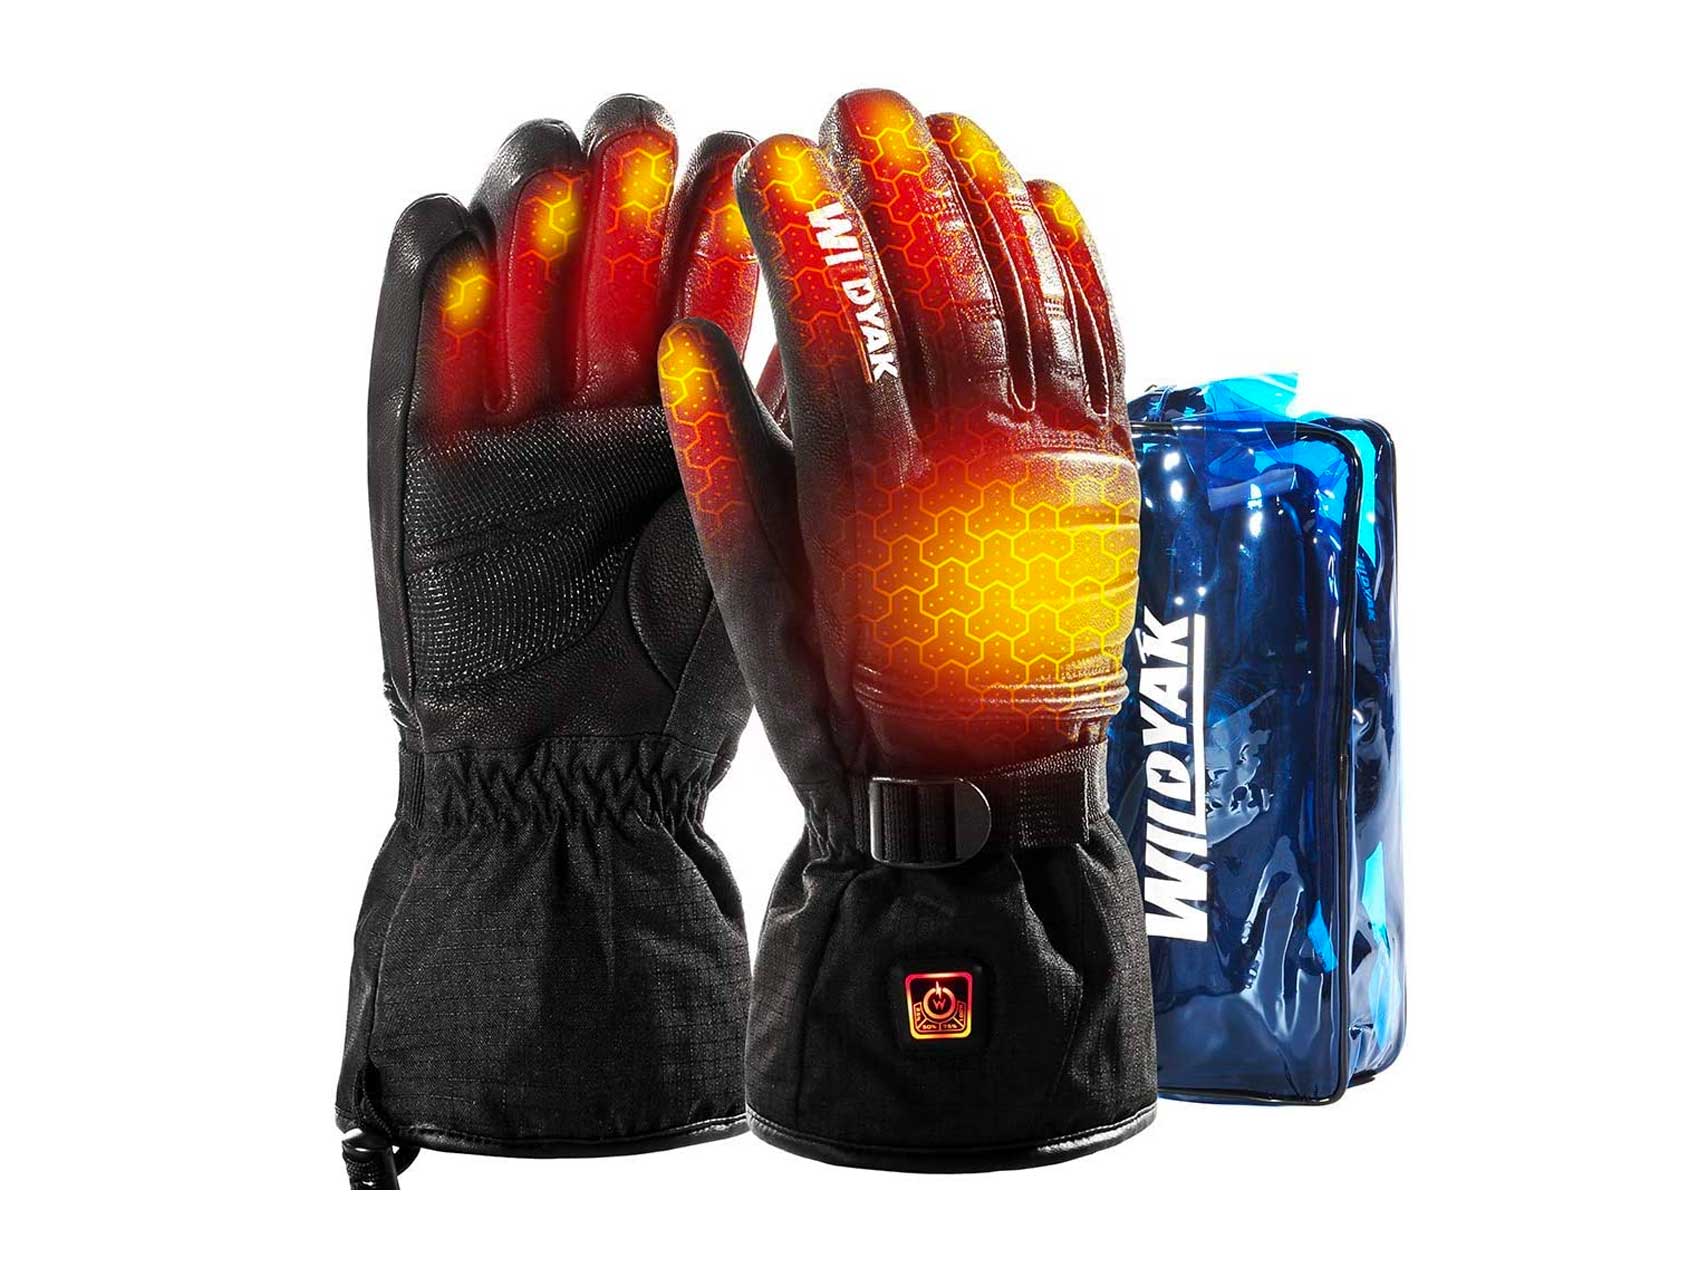 WILDYAK Heated Gloves for Men Women, Electric Heating Gloves for Motorcycle,Ski,Hunting,Snowmobile